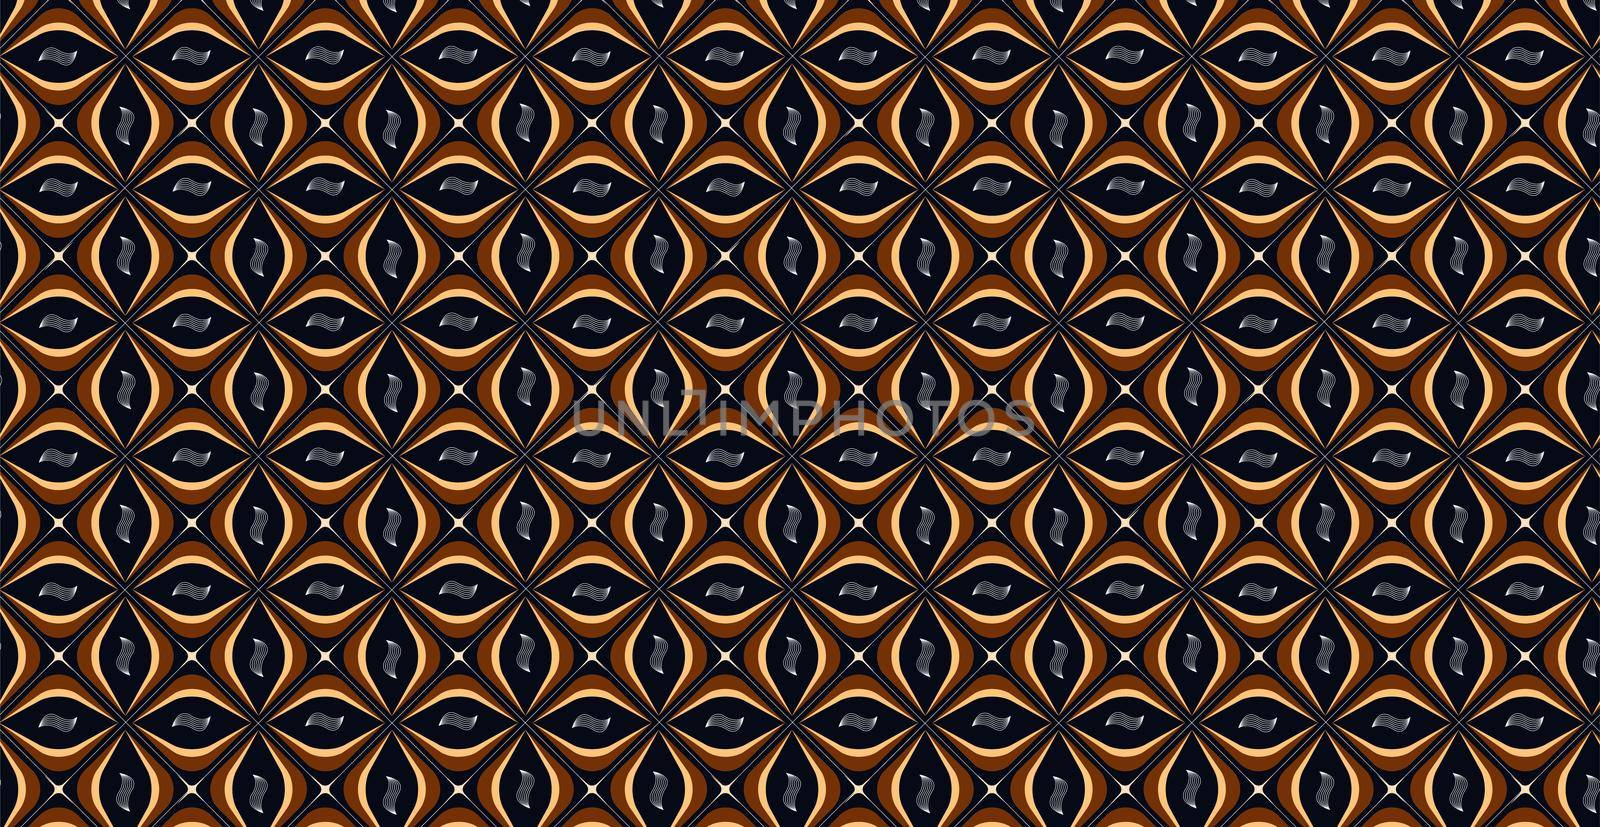 Abstract checkered pattern by AndreyKENO